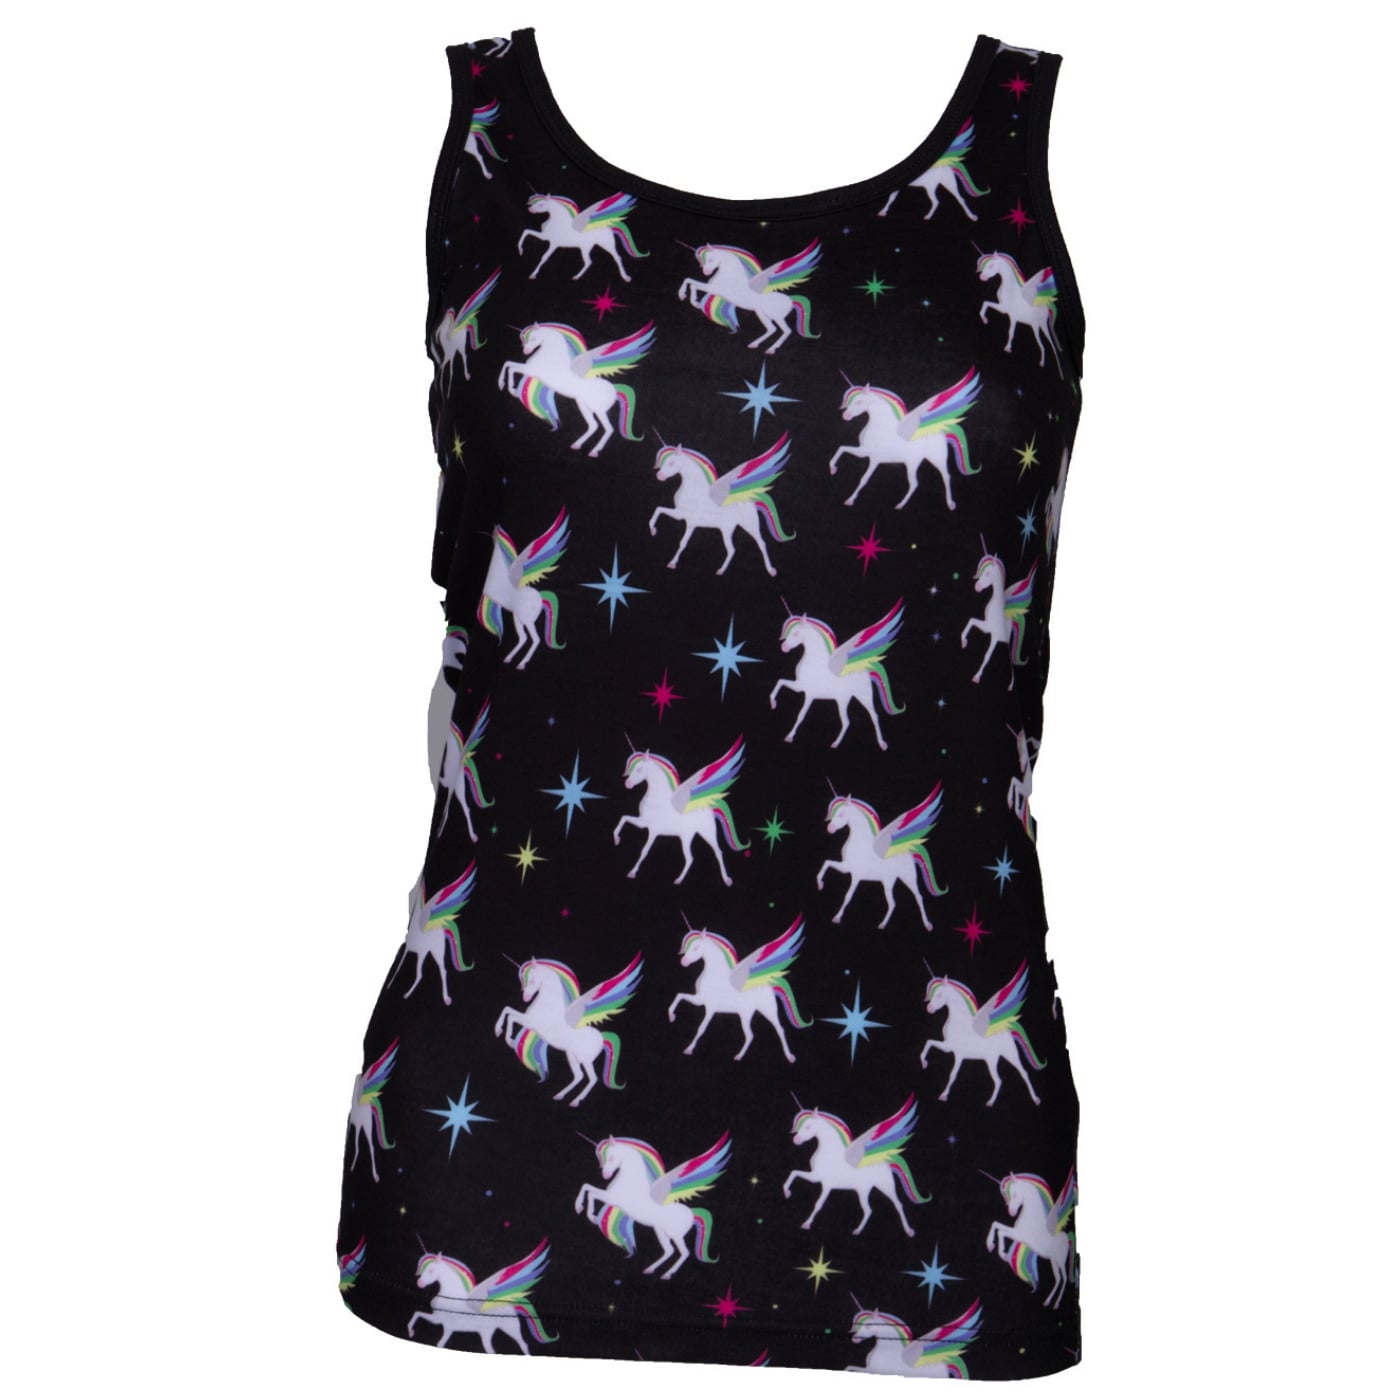 Blessing Singlet Top by RainbowsAndFairies.com.au (Unicorn - Winged Unicorn - Tank Top - Vintage Inspired - Kitsch - Pegasus - Mythical Creature) - SKU: CL_SGLET_BLESS_ORG - Pic-01